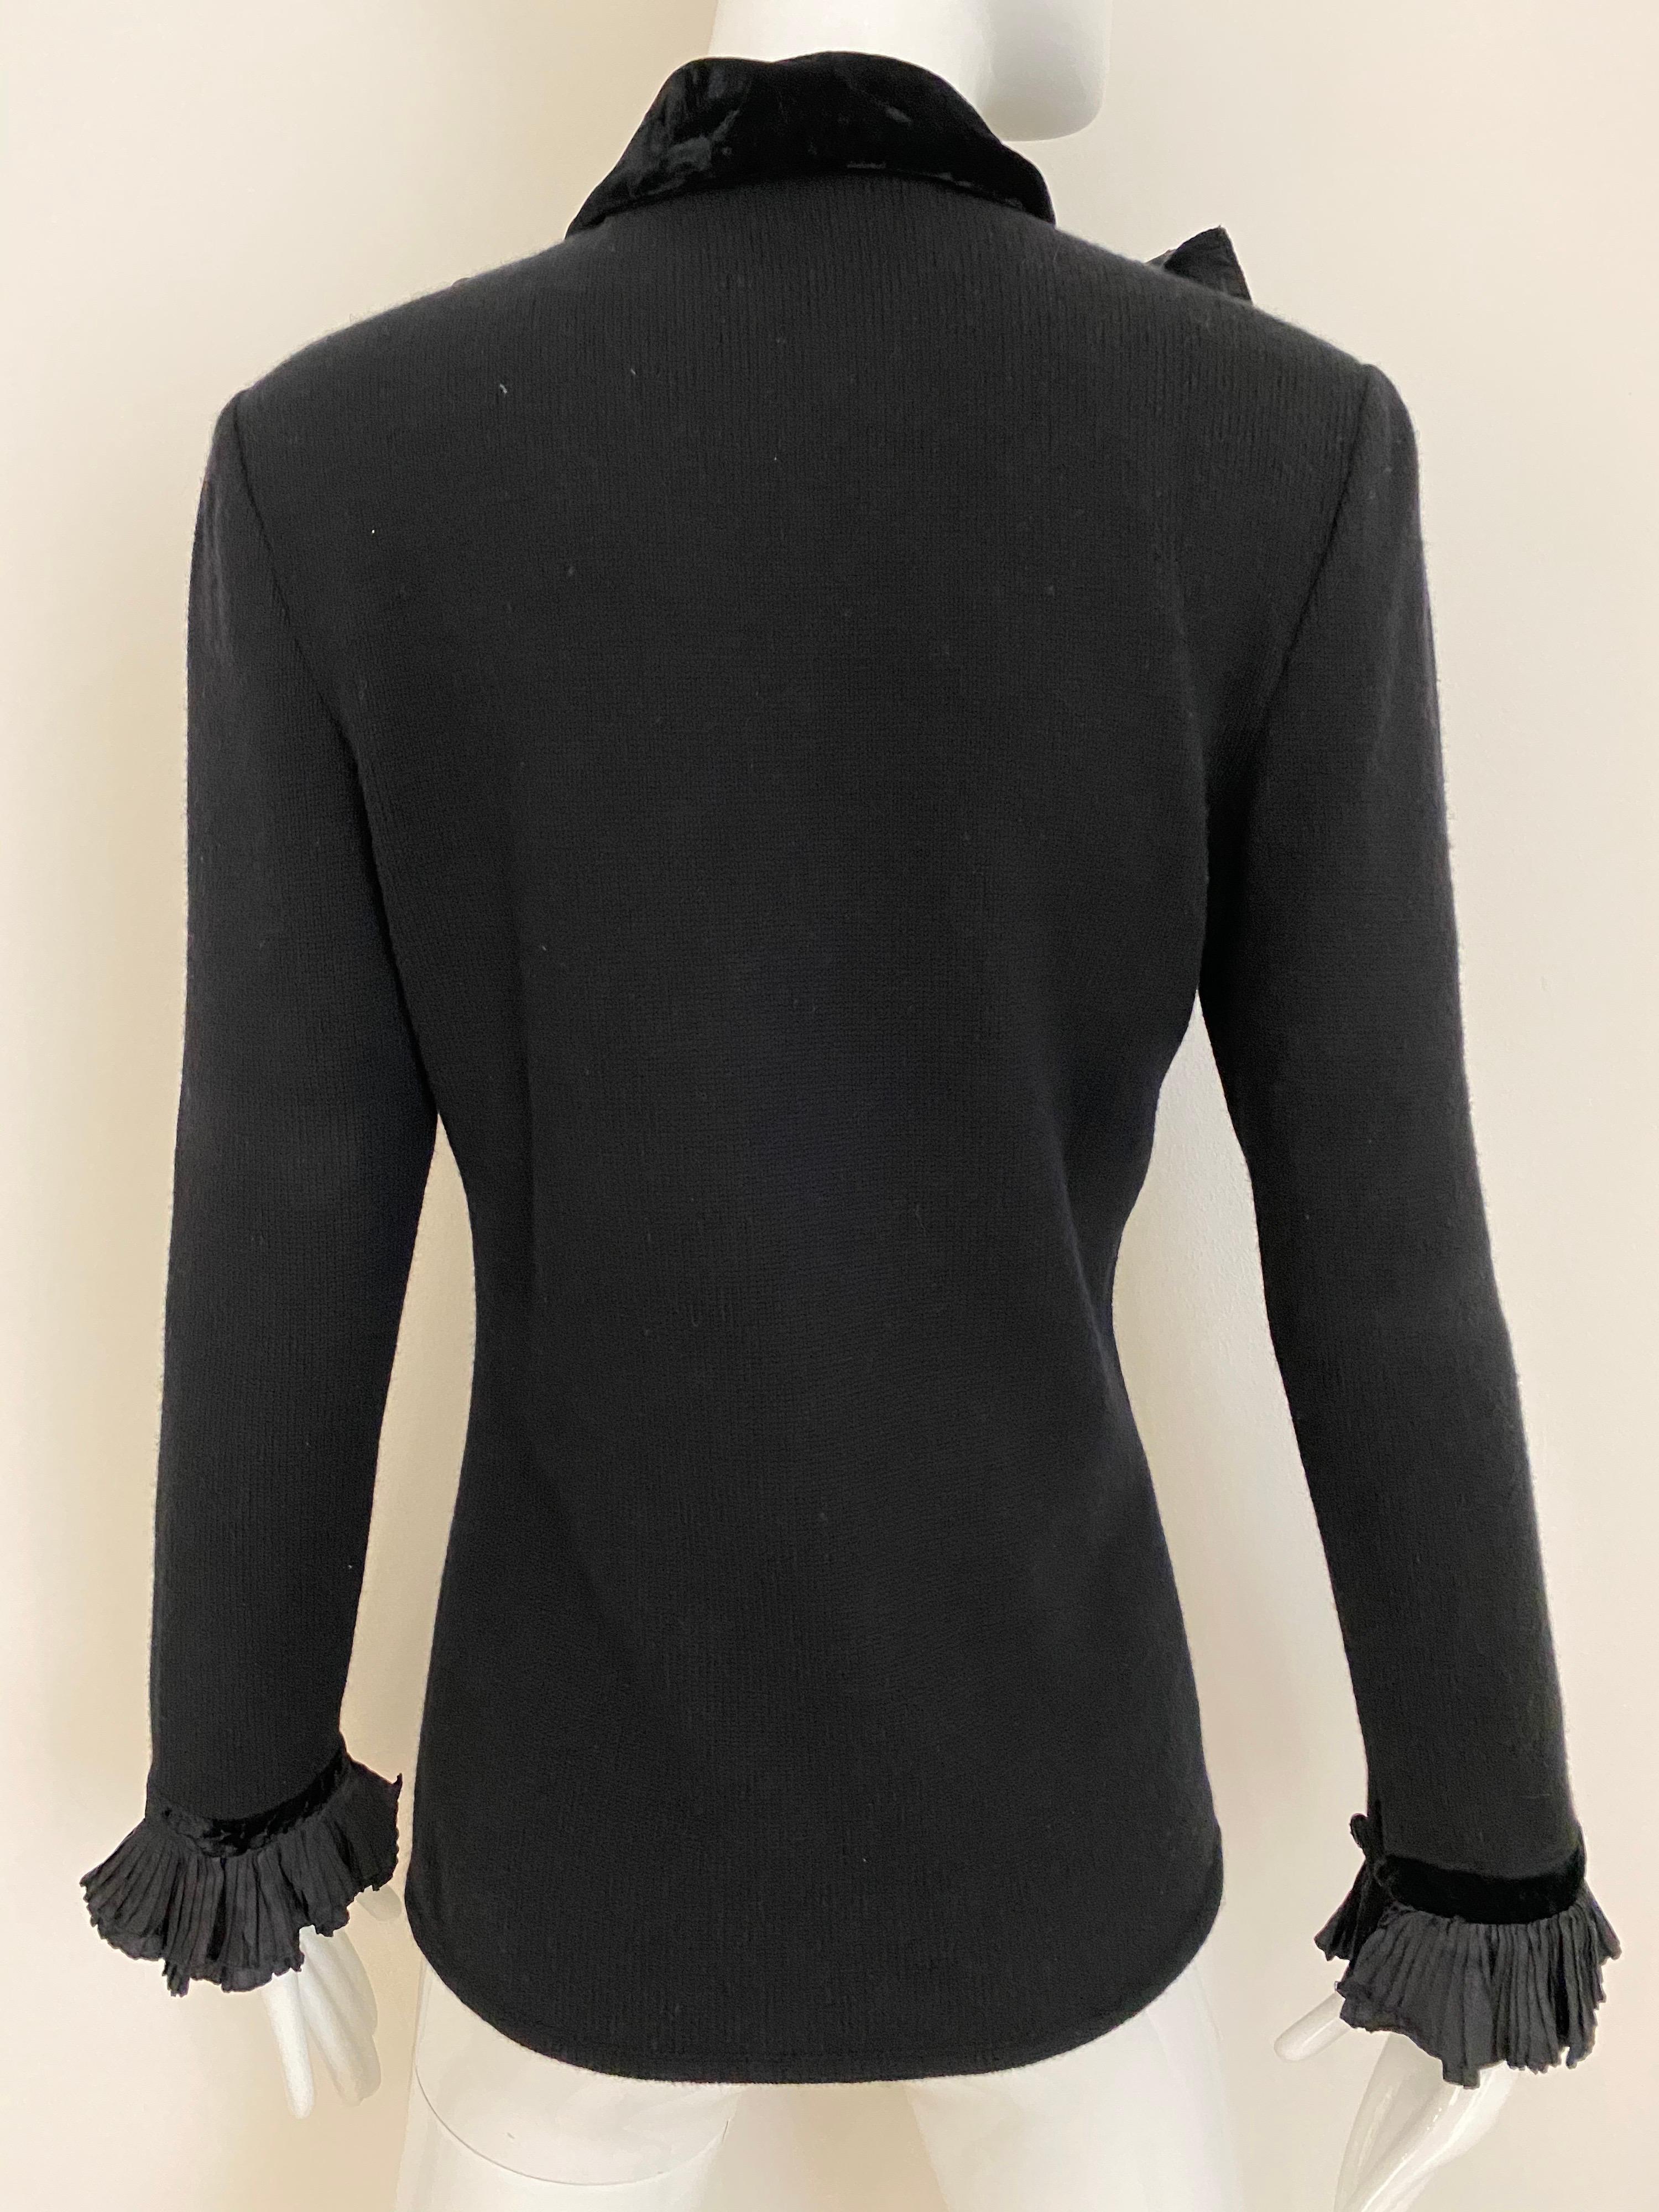 Chic 80s Valentino cashmere blend black sweater with large silk bow.
Ruffle sleeve with velvet trim.
Fit size US 4